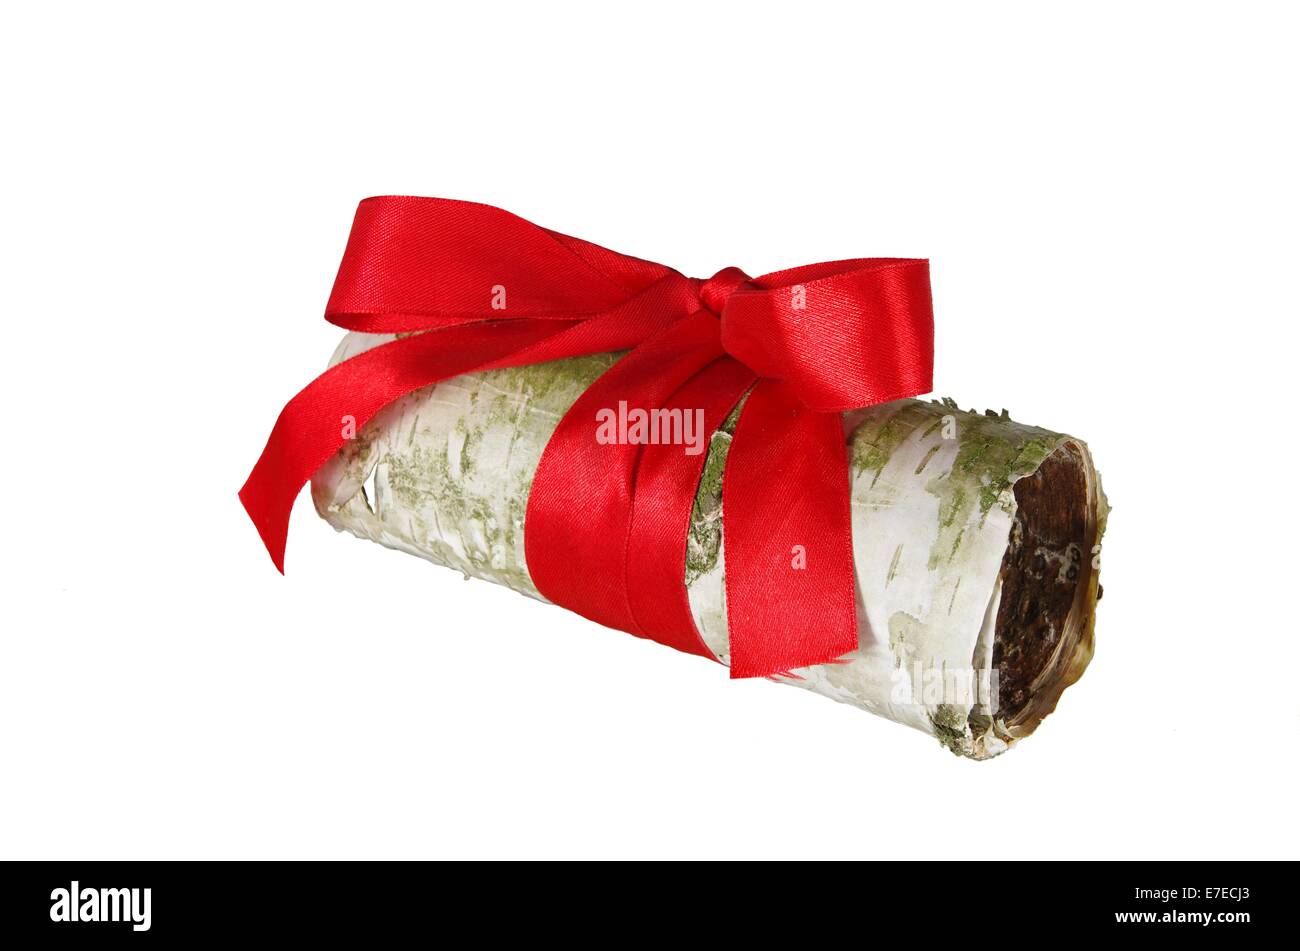 rolled up in roll birch's bark on white background, Stock Photo